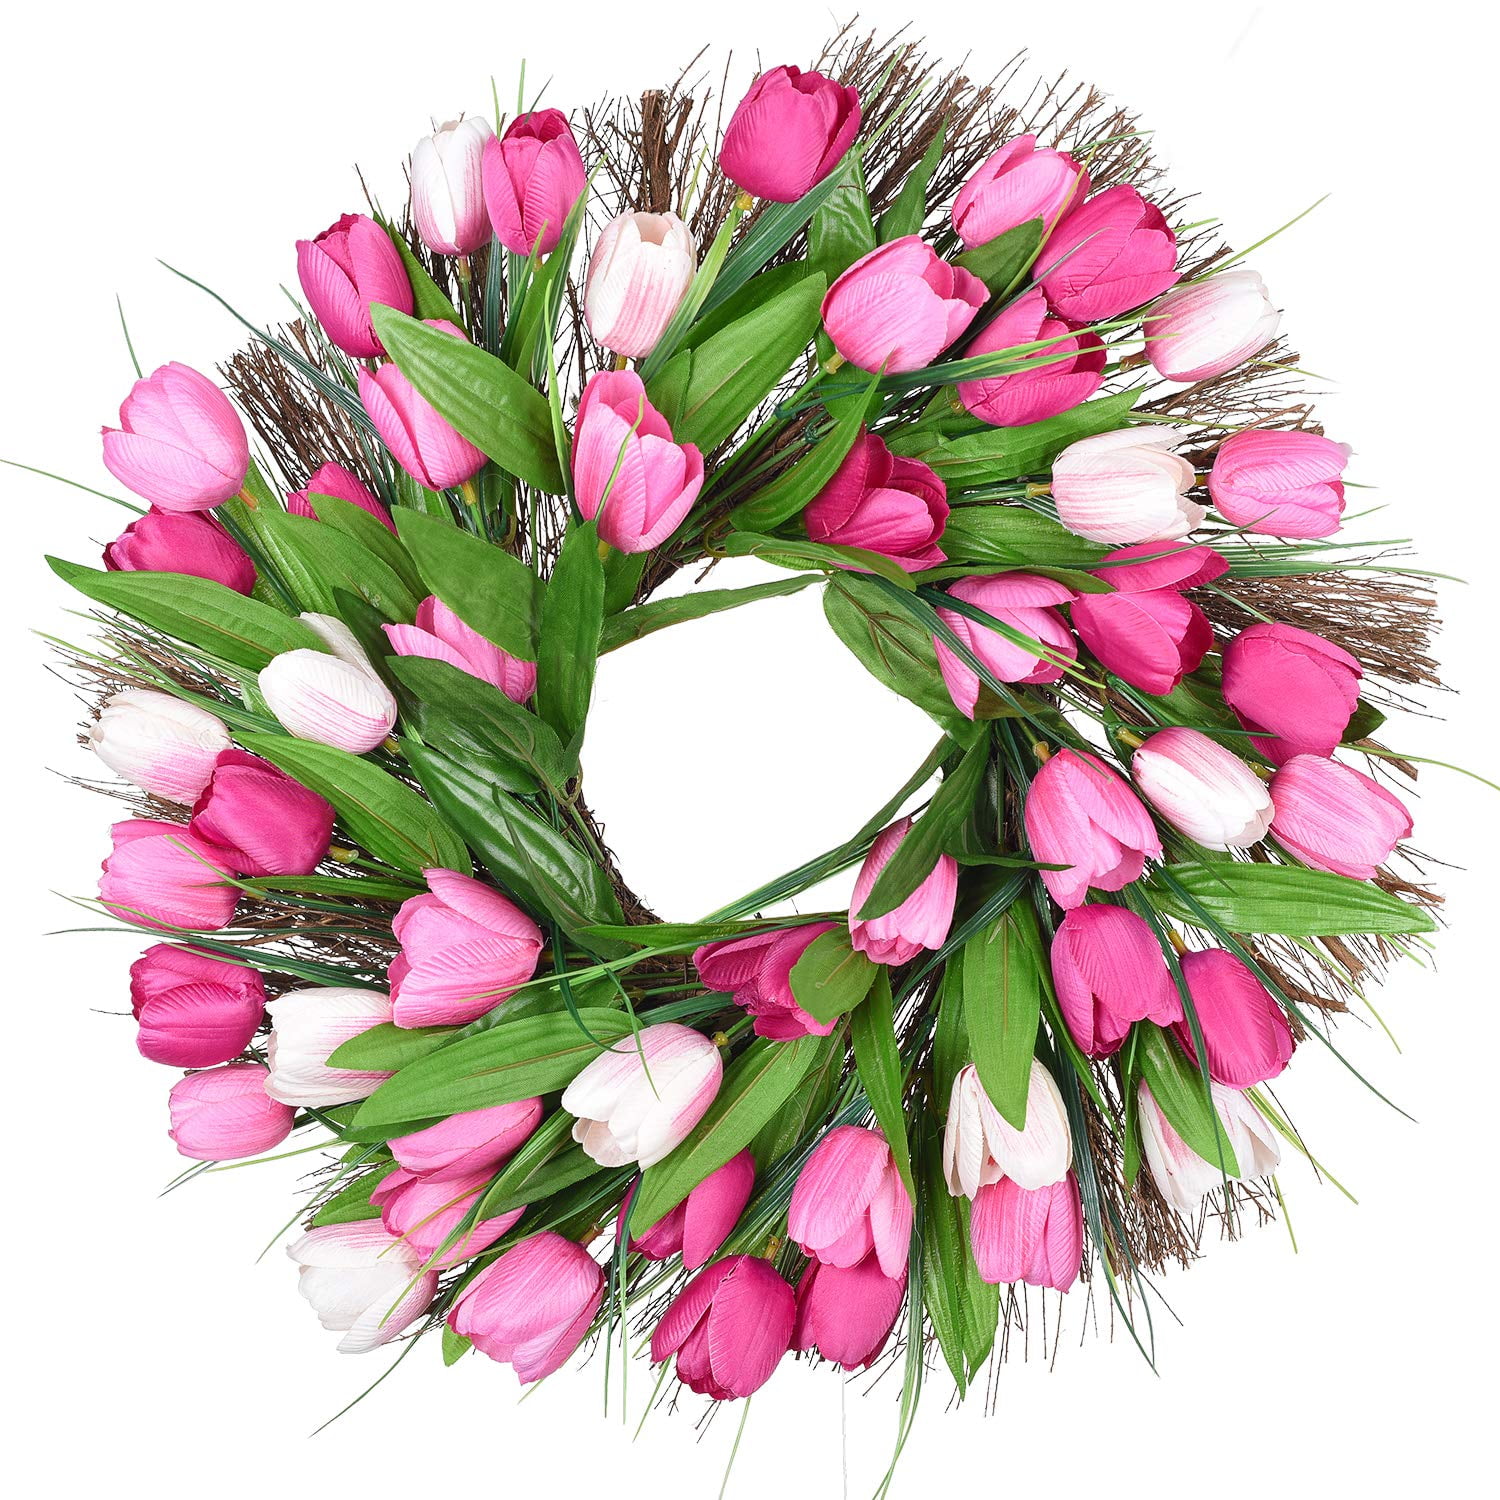 Round Napoli Yellow Tulip Wreath for Front Door Silk Artificial Tulip Flower Wreath with All Year Around Green Leaves for Decorative Faux Floral Wreath Window Wedding Outdoor Indoor 